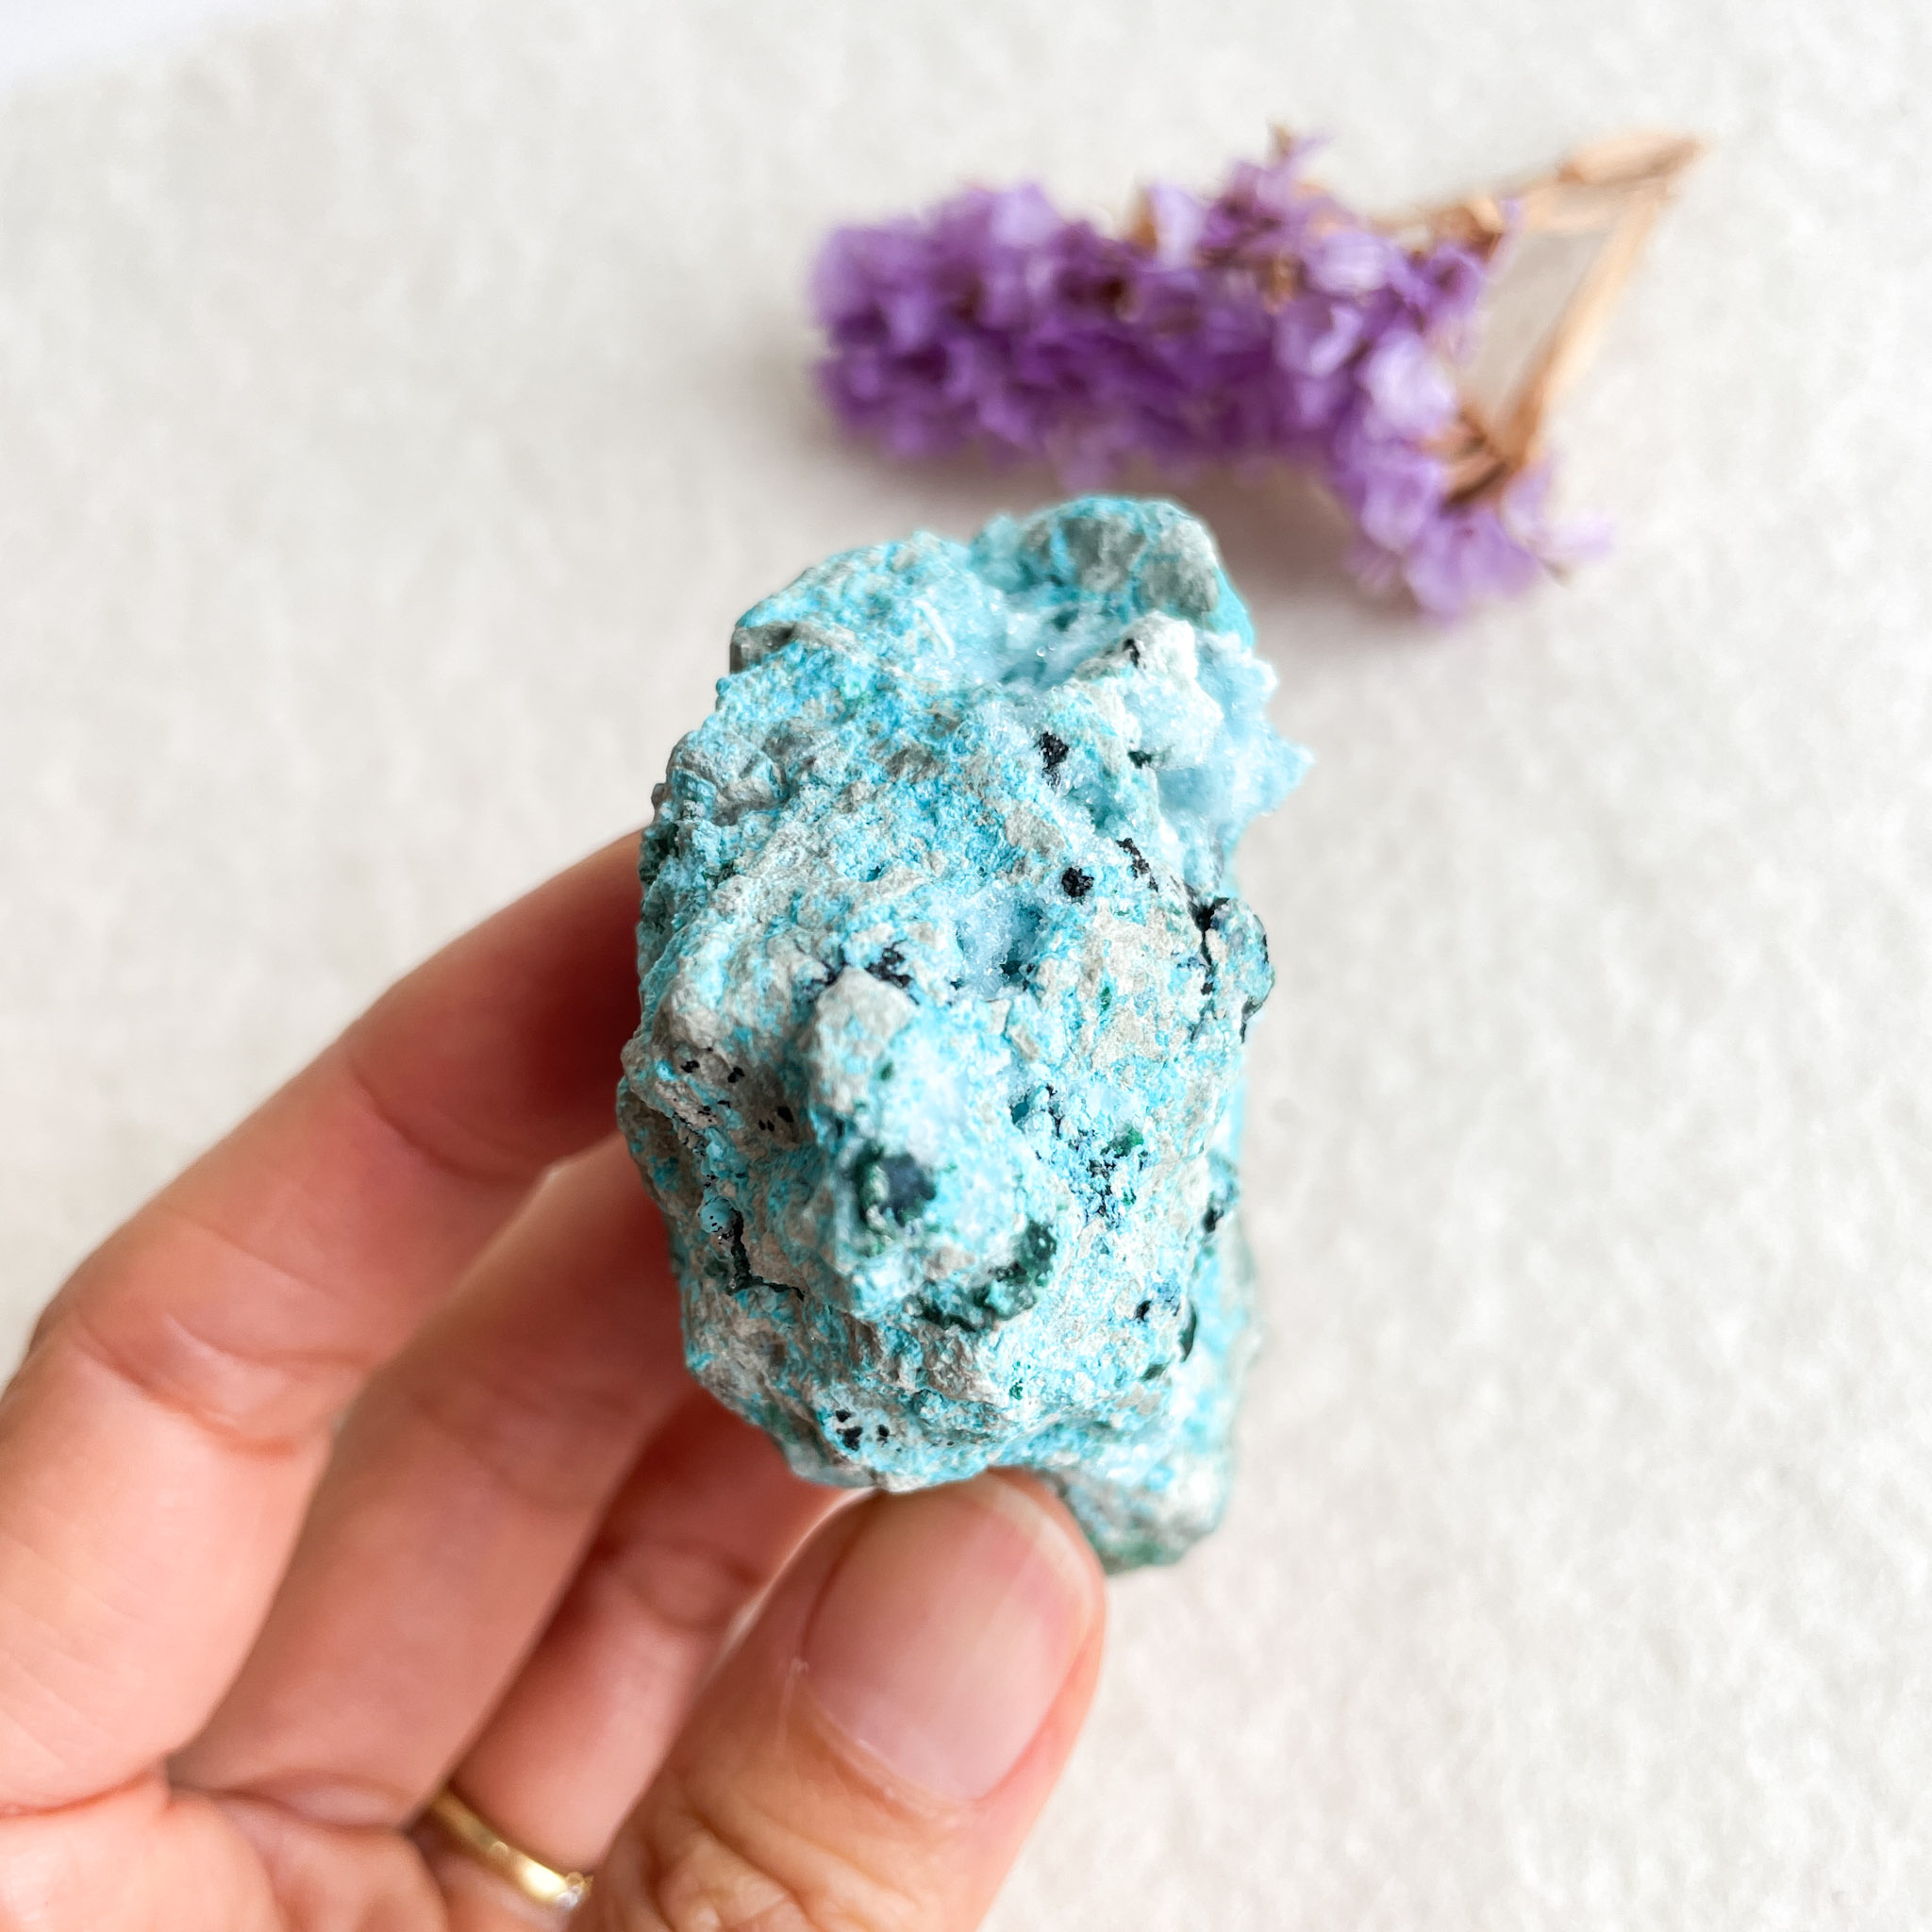 A person holds a bright blue turquoise mineral specimen with a blurred background of lavender flowers and textured white paper.